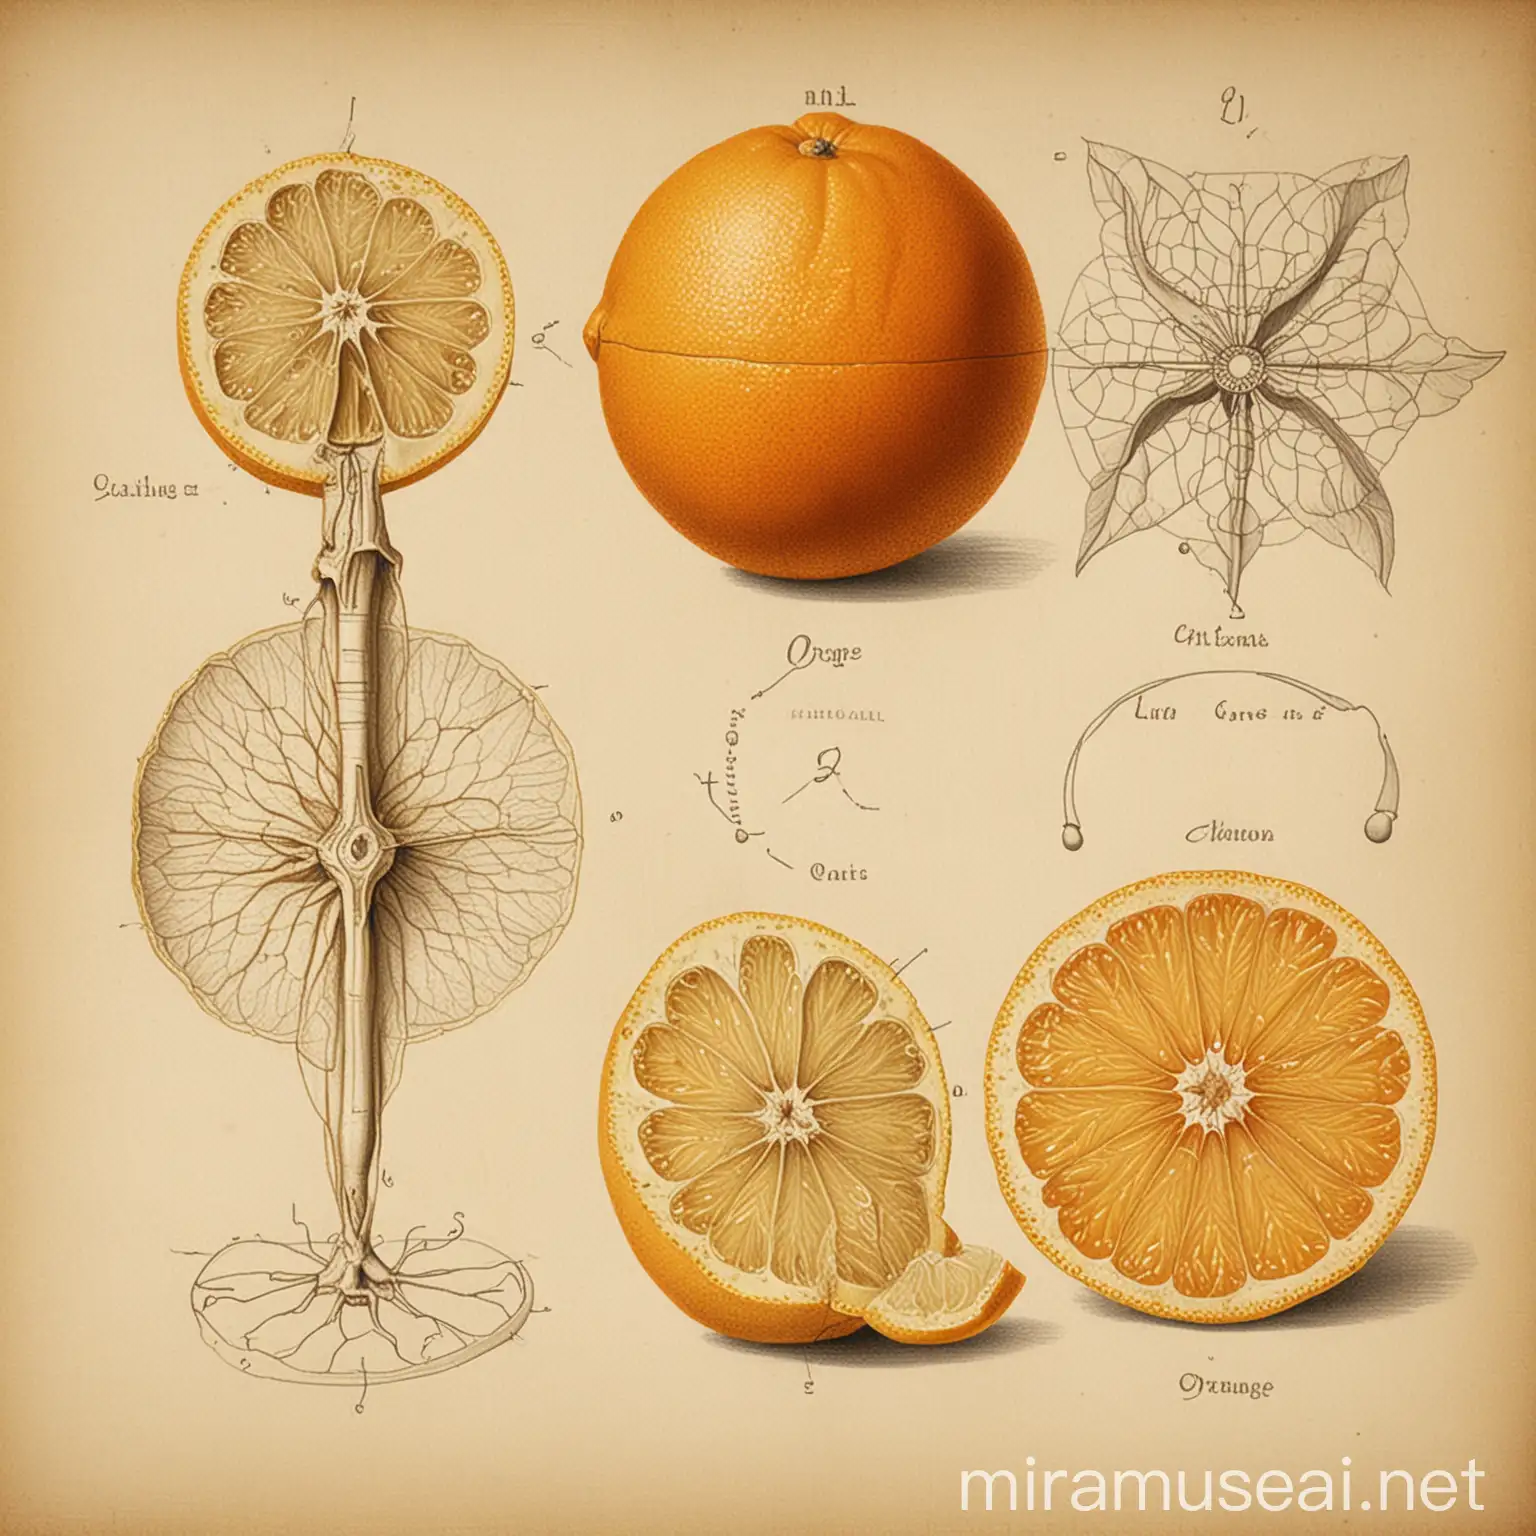 1700s style scientific drawing of the parts of an orange and lemon

